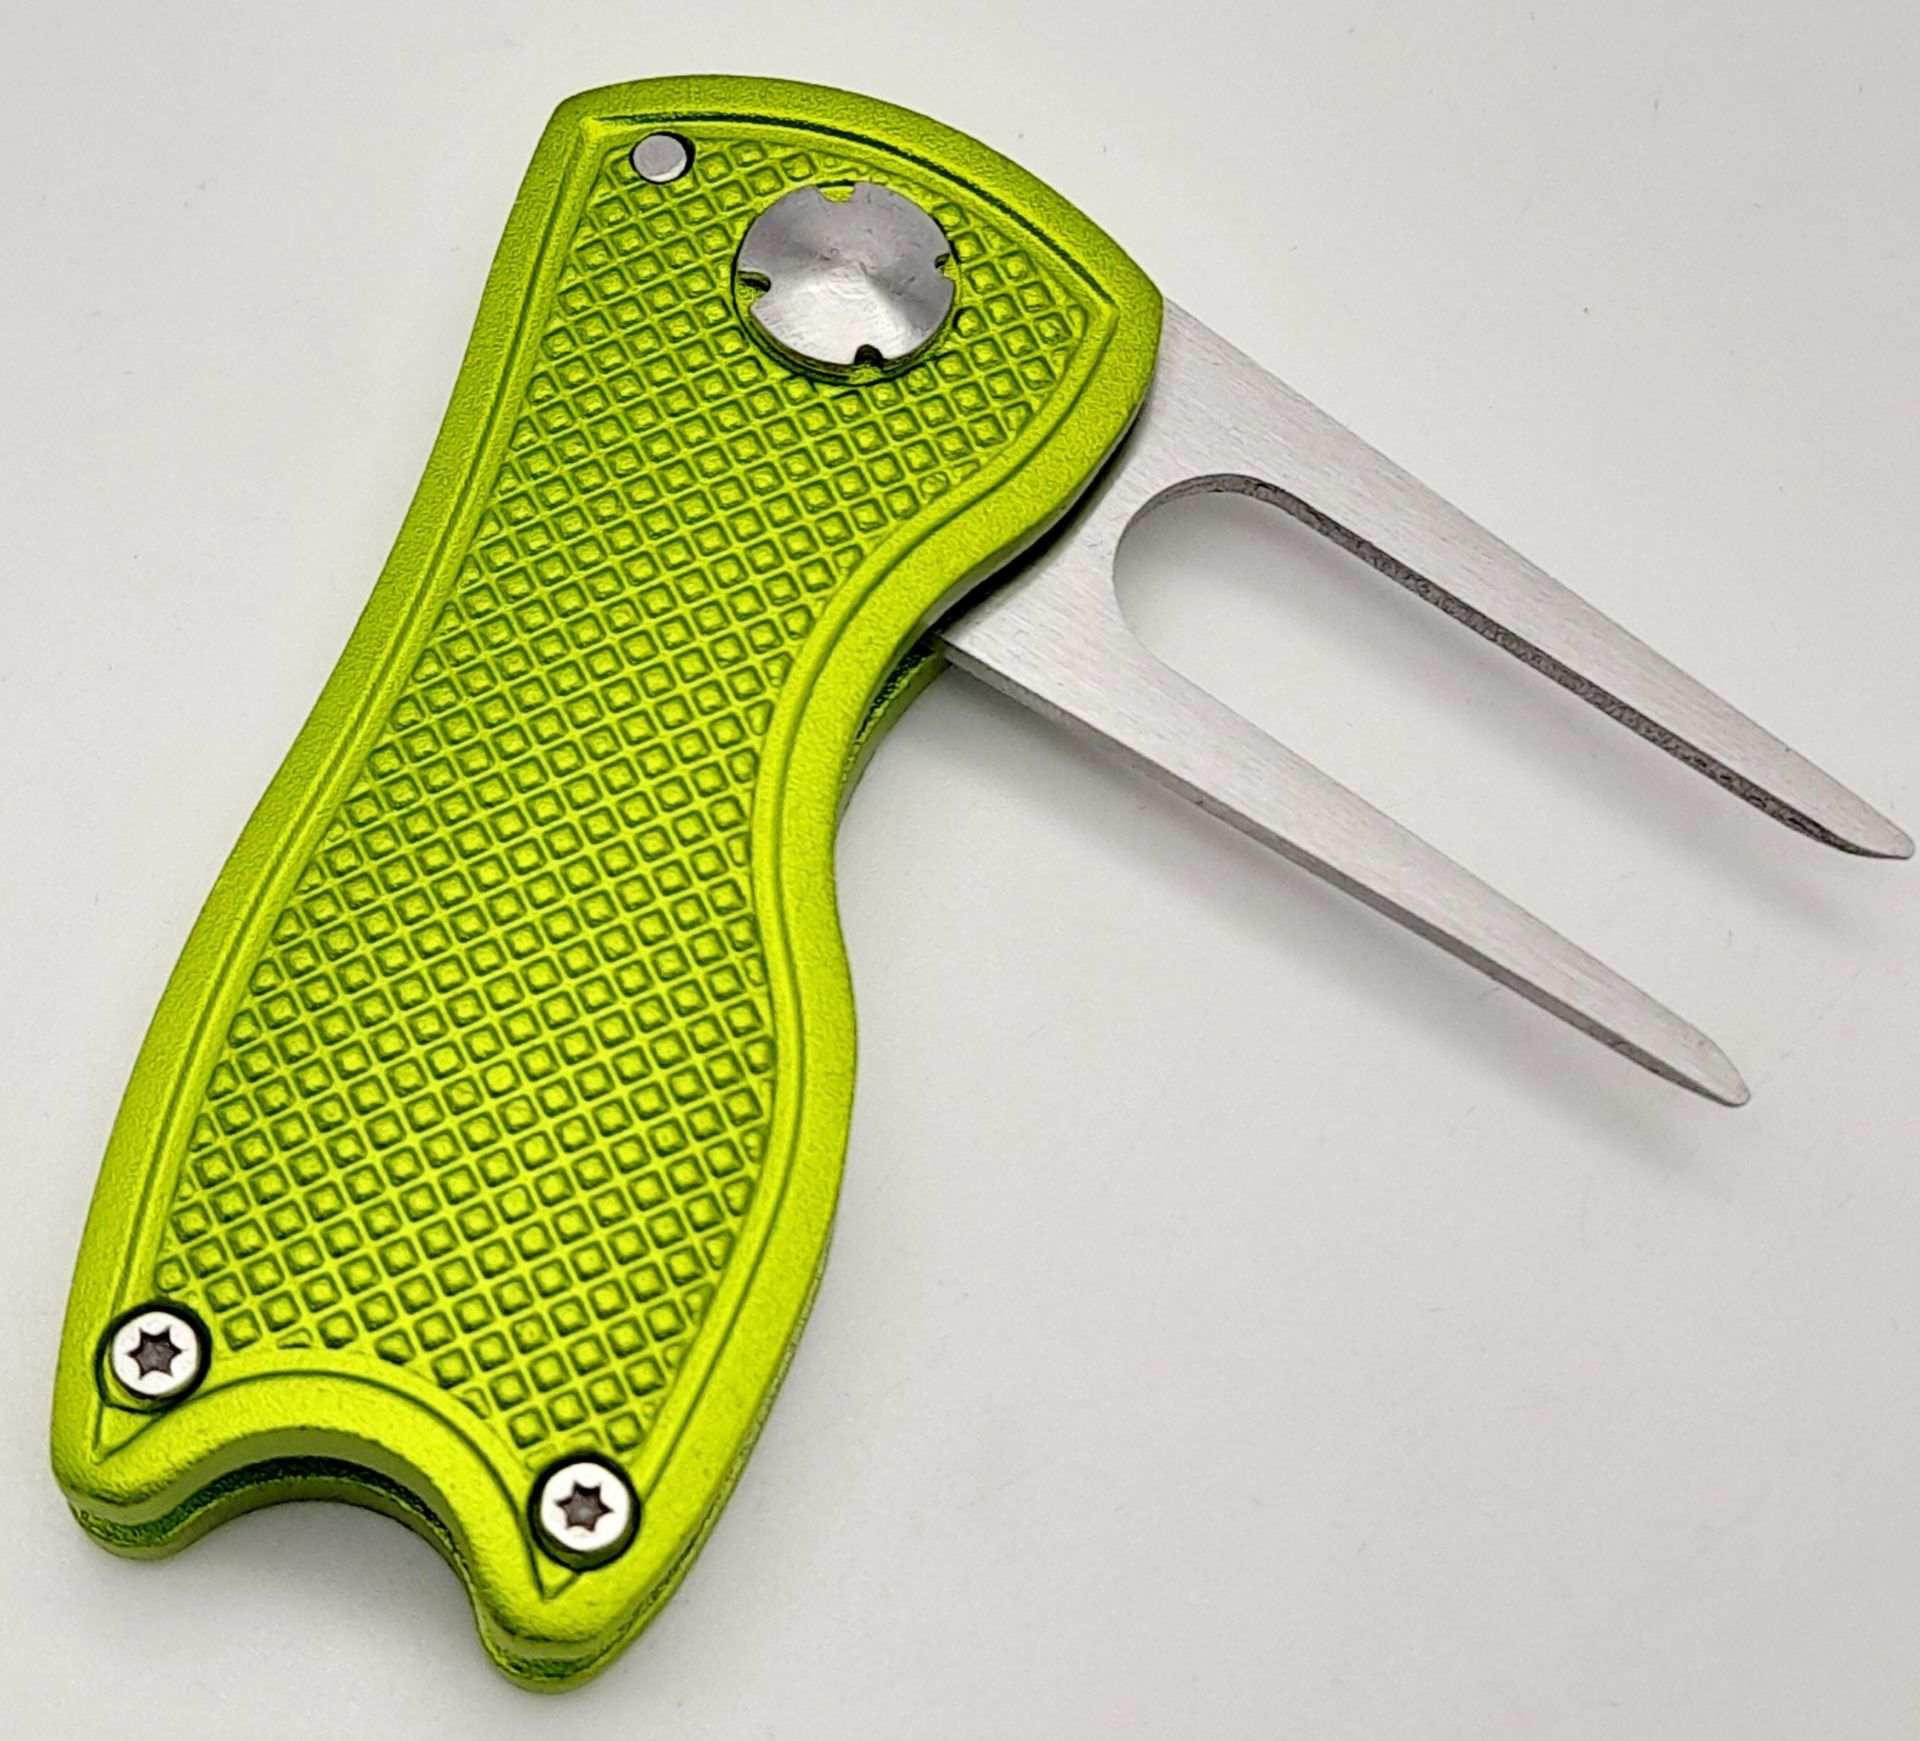 A Rolex Branded Retractable 'Flick' Golf Putting Divot Repair Tool. Removable magnetic ball marker - - Bild 3 aus 4